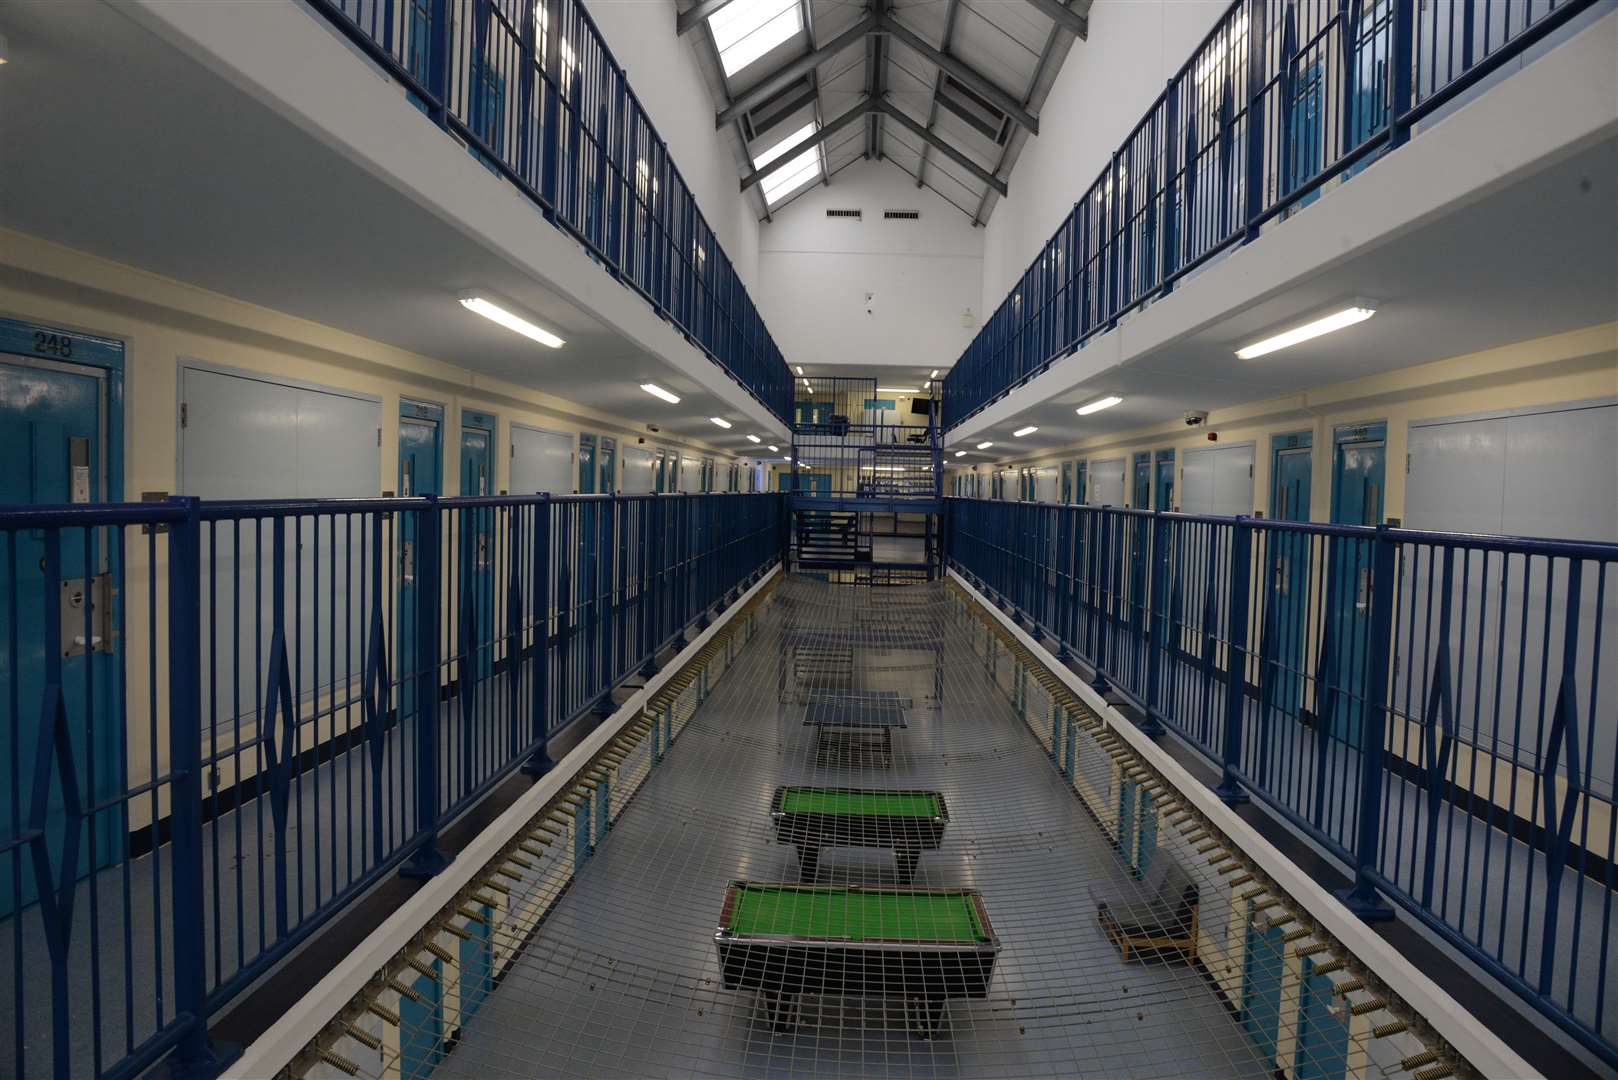 One of the wings at HMP Swaleside